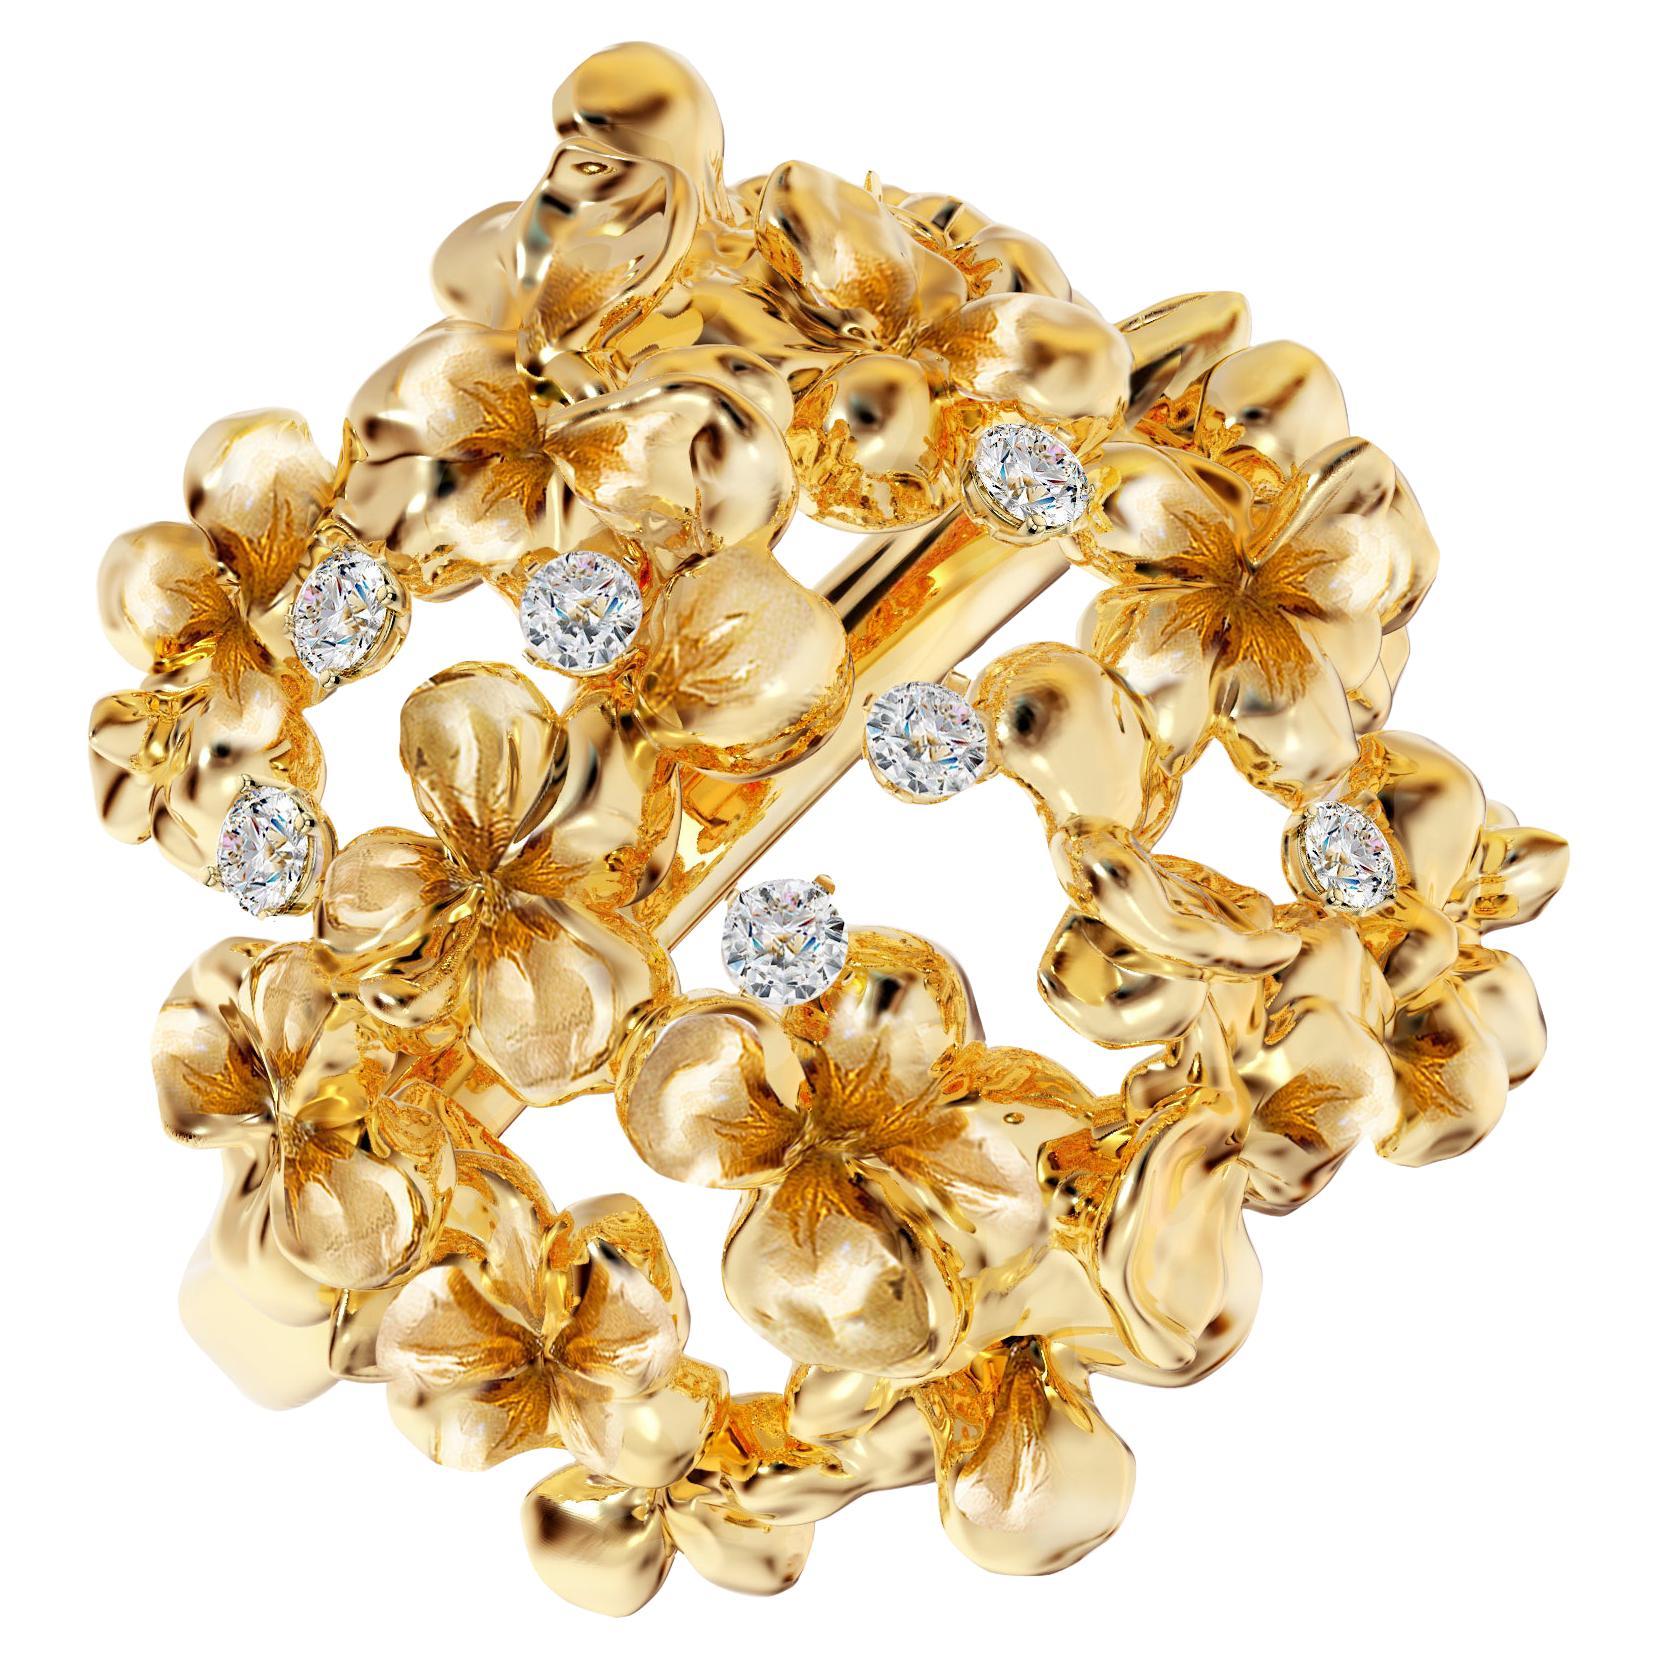 This contemporary Hortensia floral brooch is crafted from 18 karat yellow gold and adorned with seven round natural diamonds (VS, F-G). The sculptural design adds extra highlights to the surface of the gold, while the diamonds add a delicate